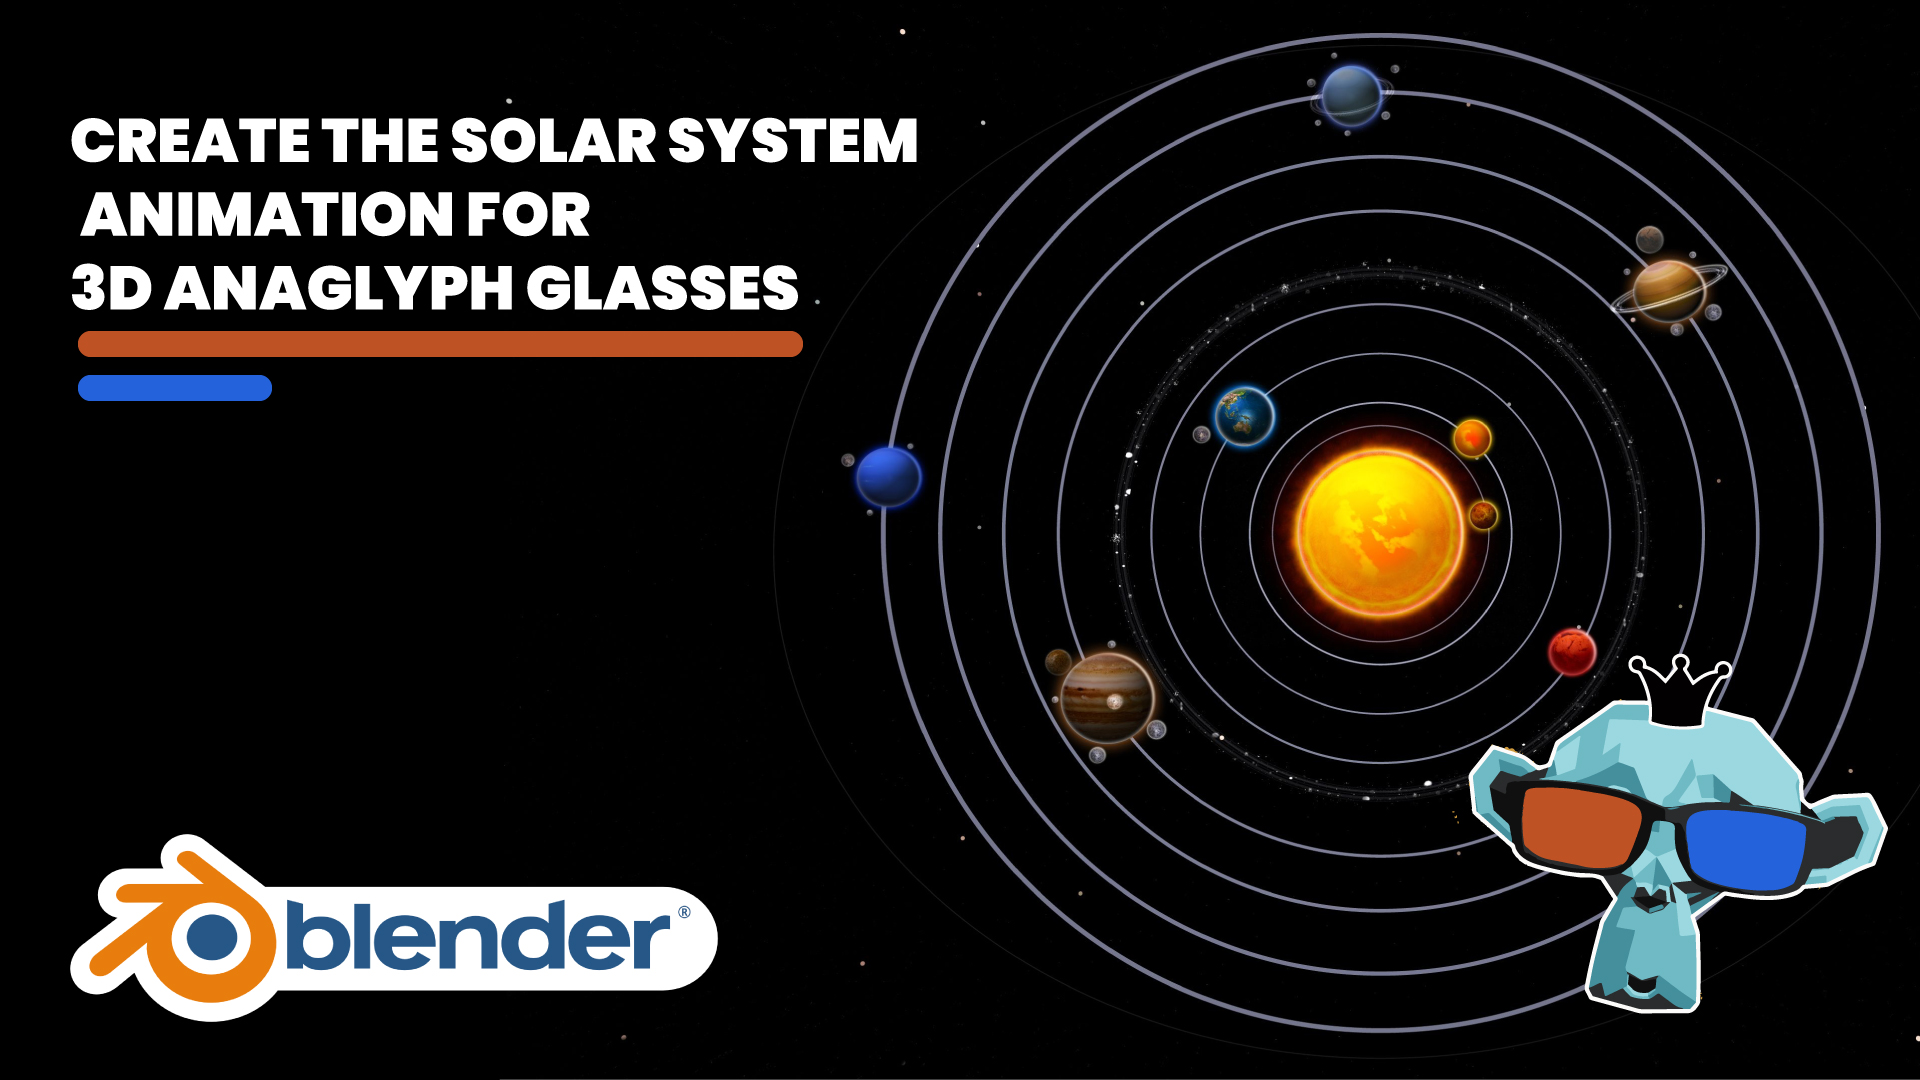 Solar System Planets 3D Anaglyph Glasses Course Blender Academy